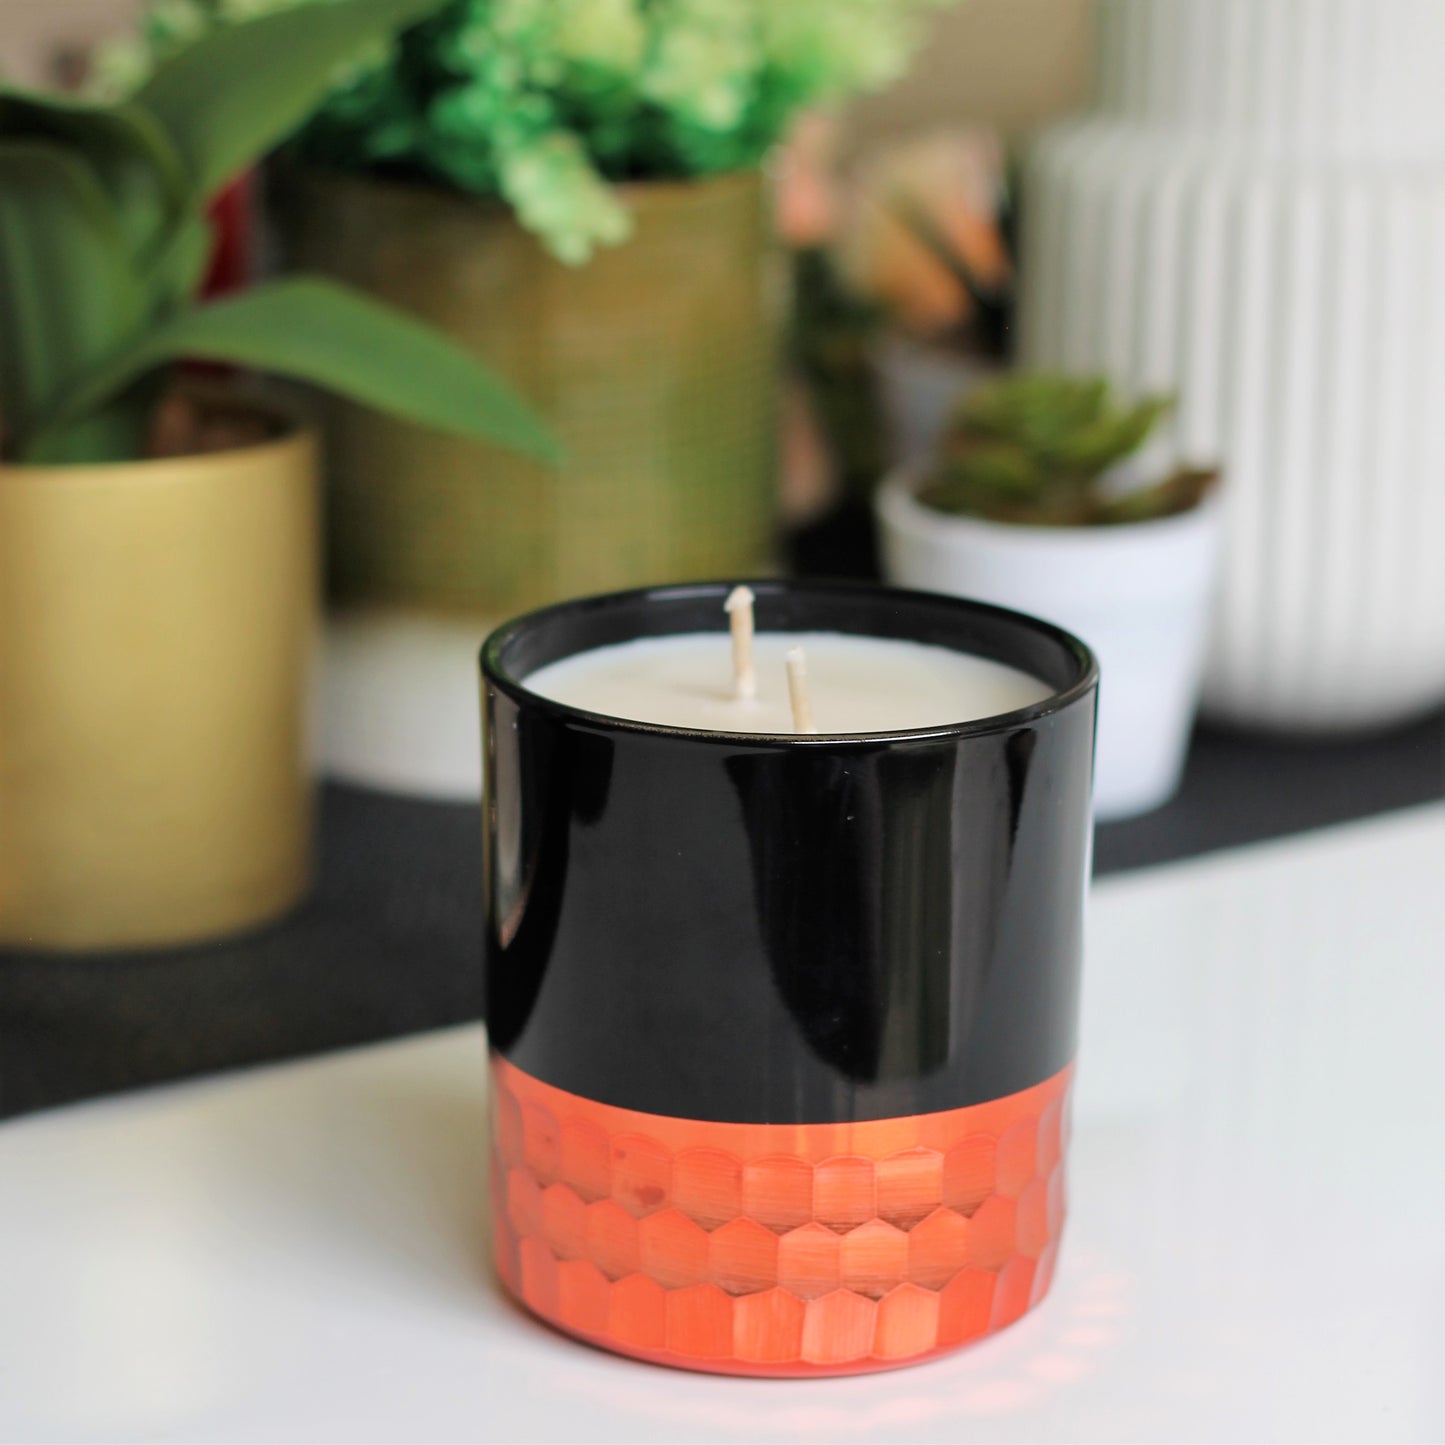 Black and Rose Gold Candle